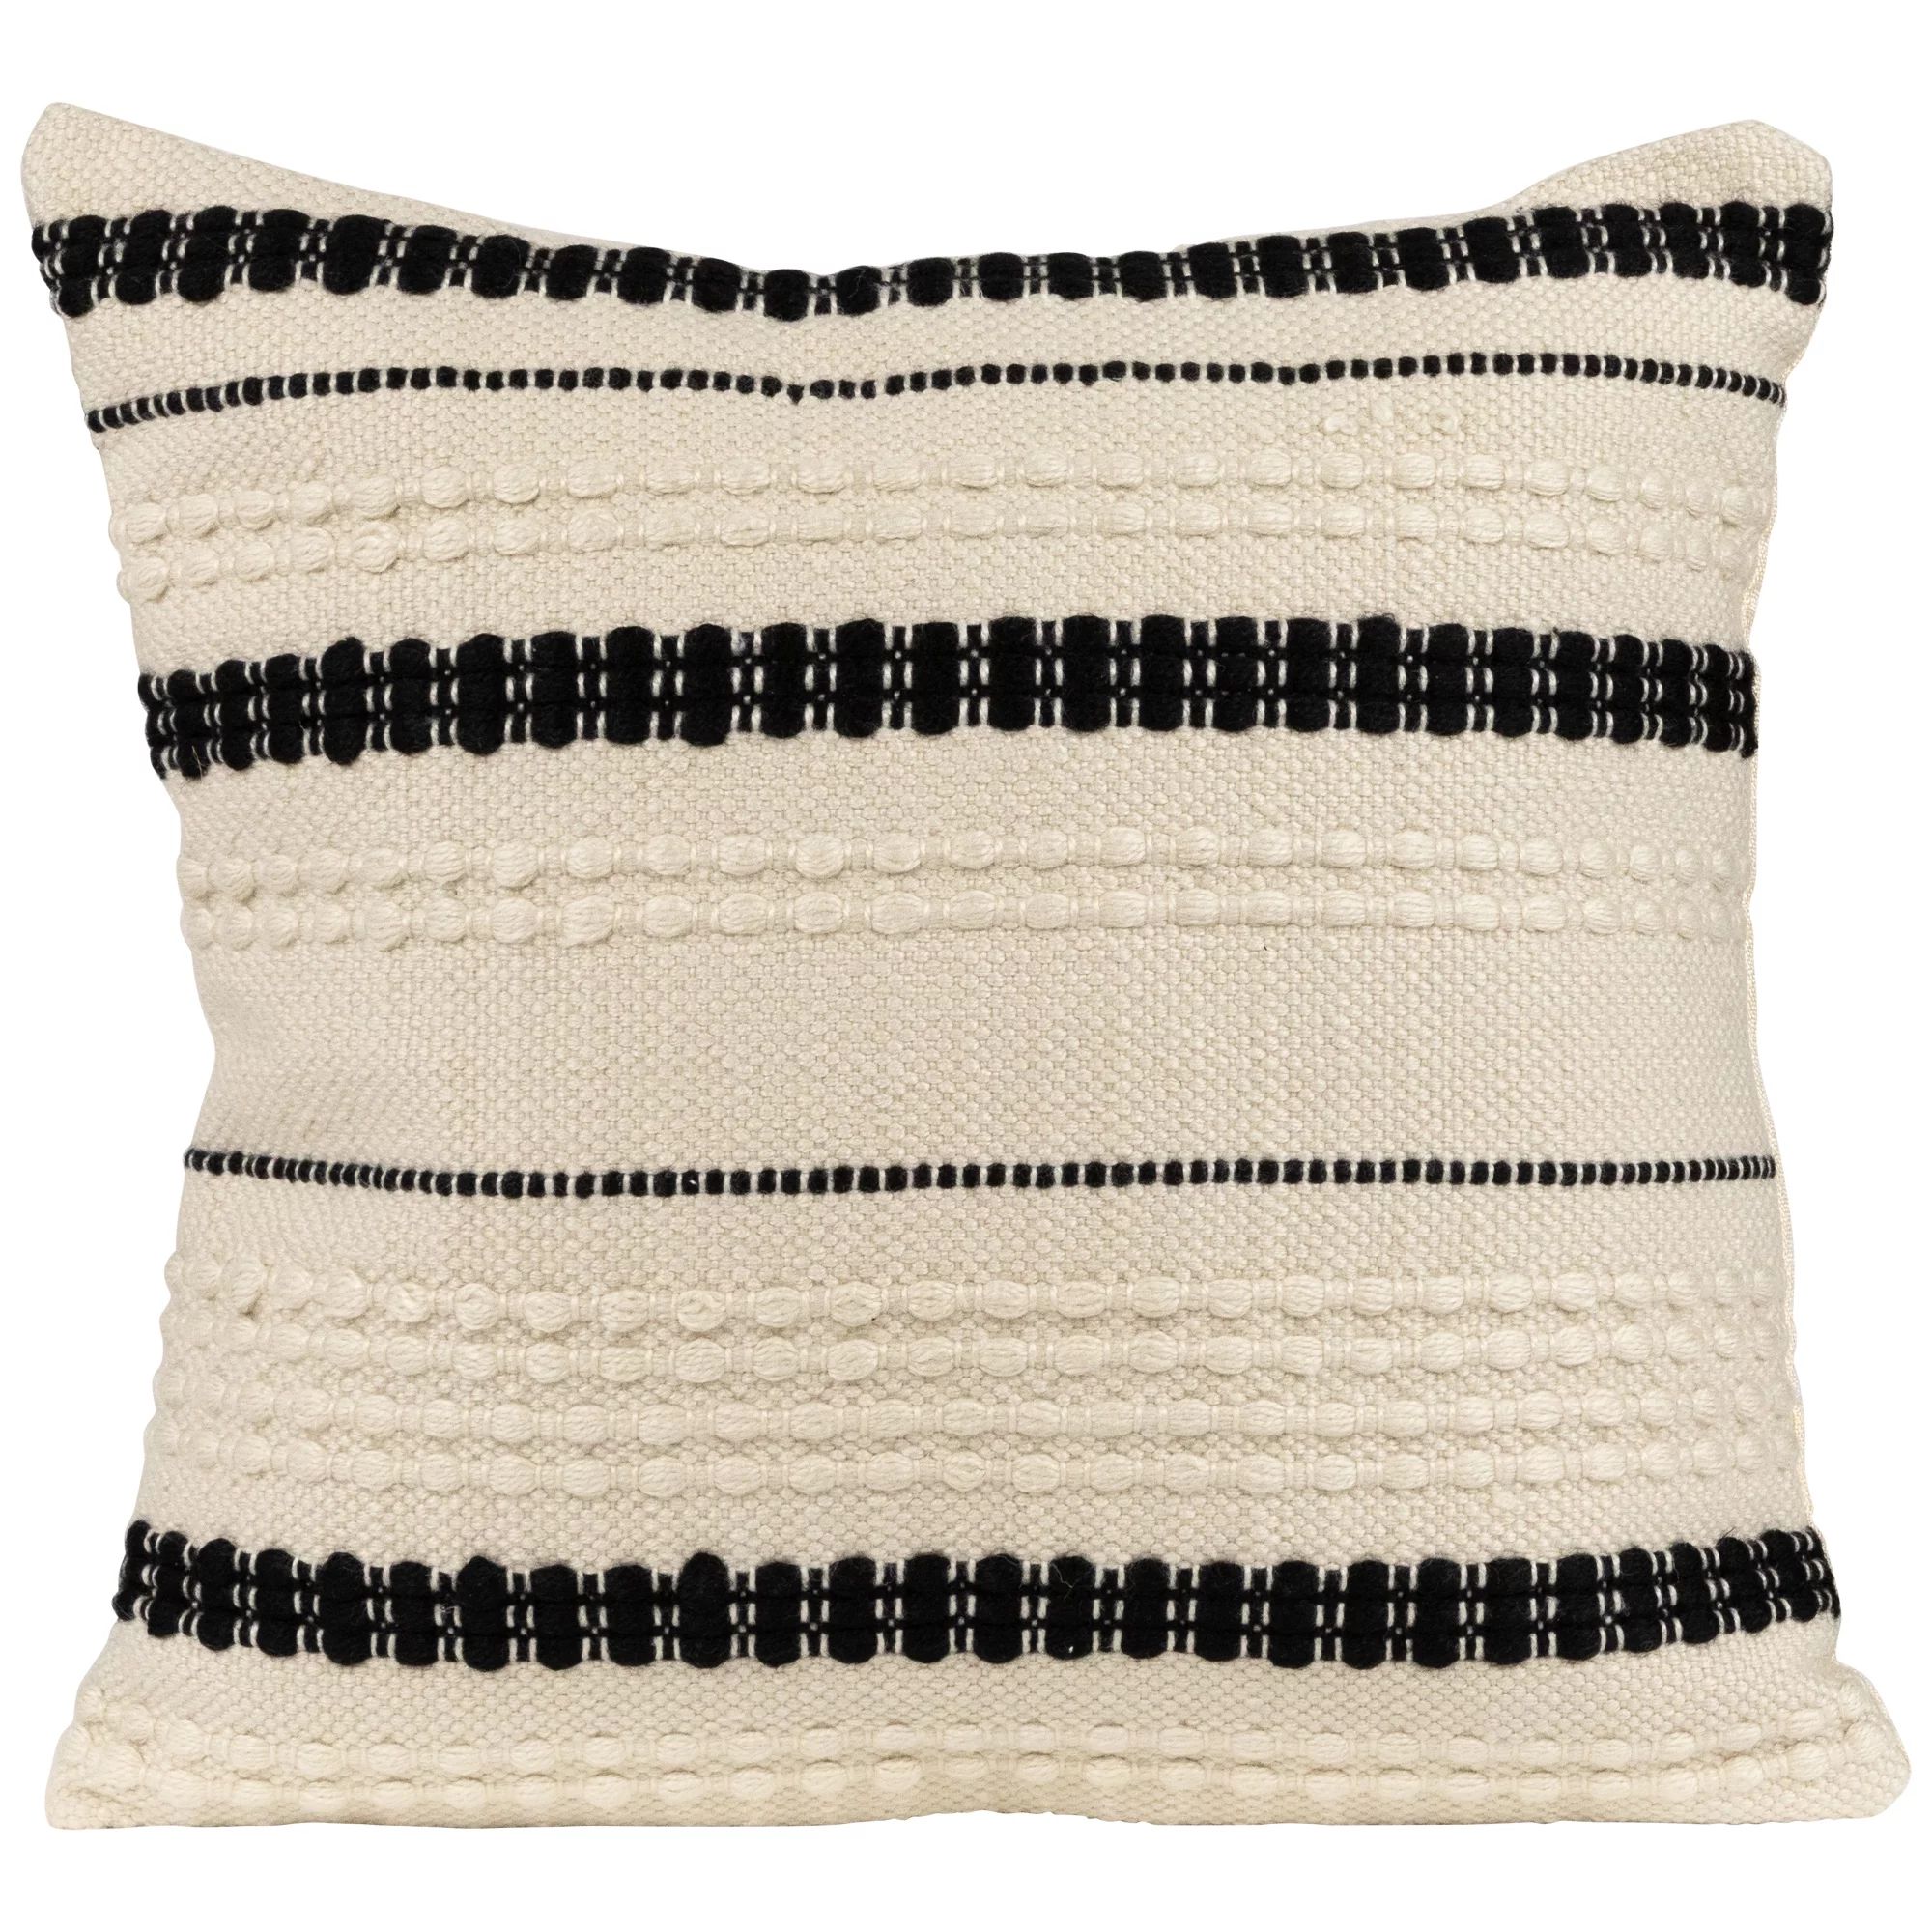 Northlight 20" White and Black Handloom Woven Outdoor Square Throw Pillow | Walmart (US)